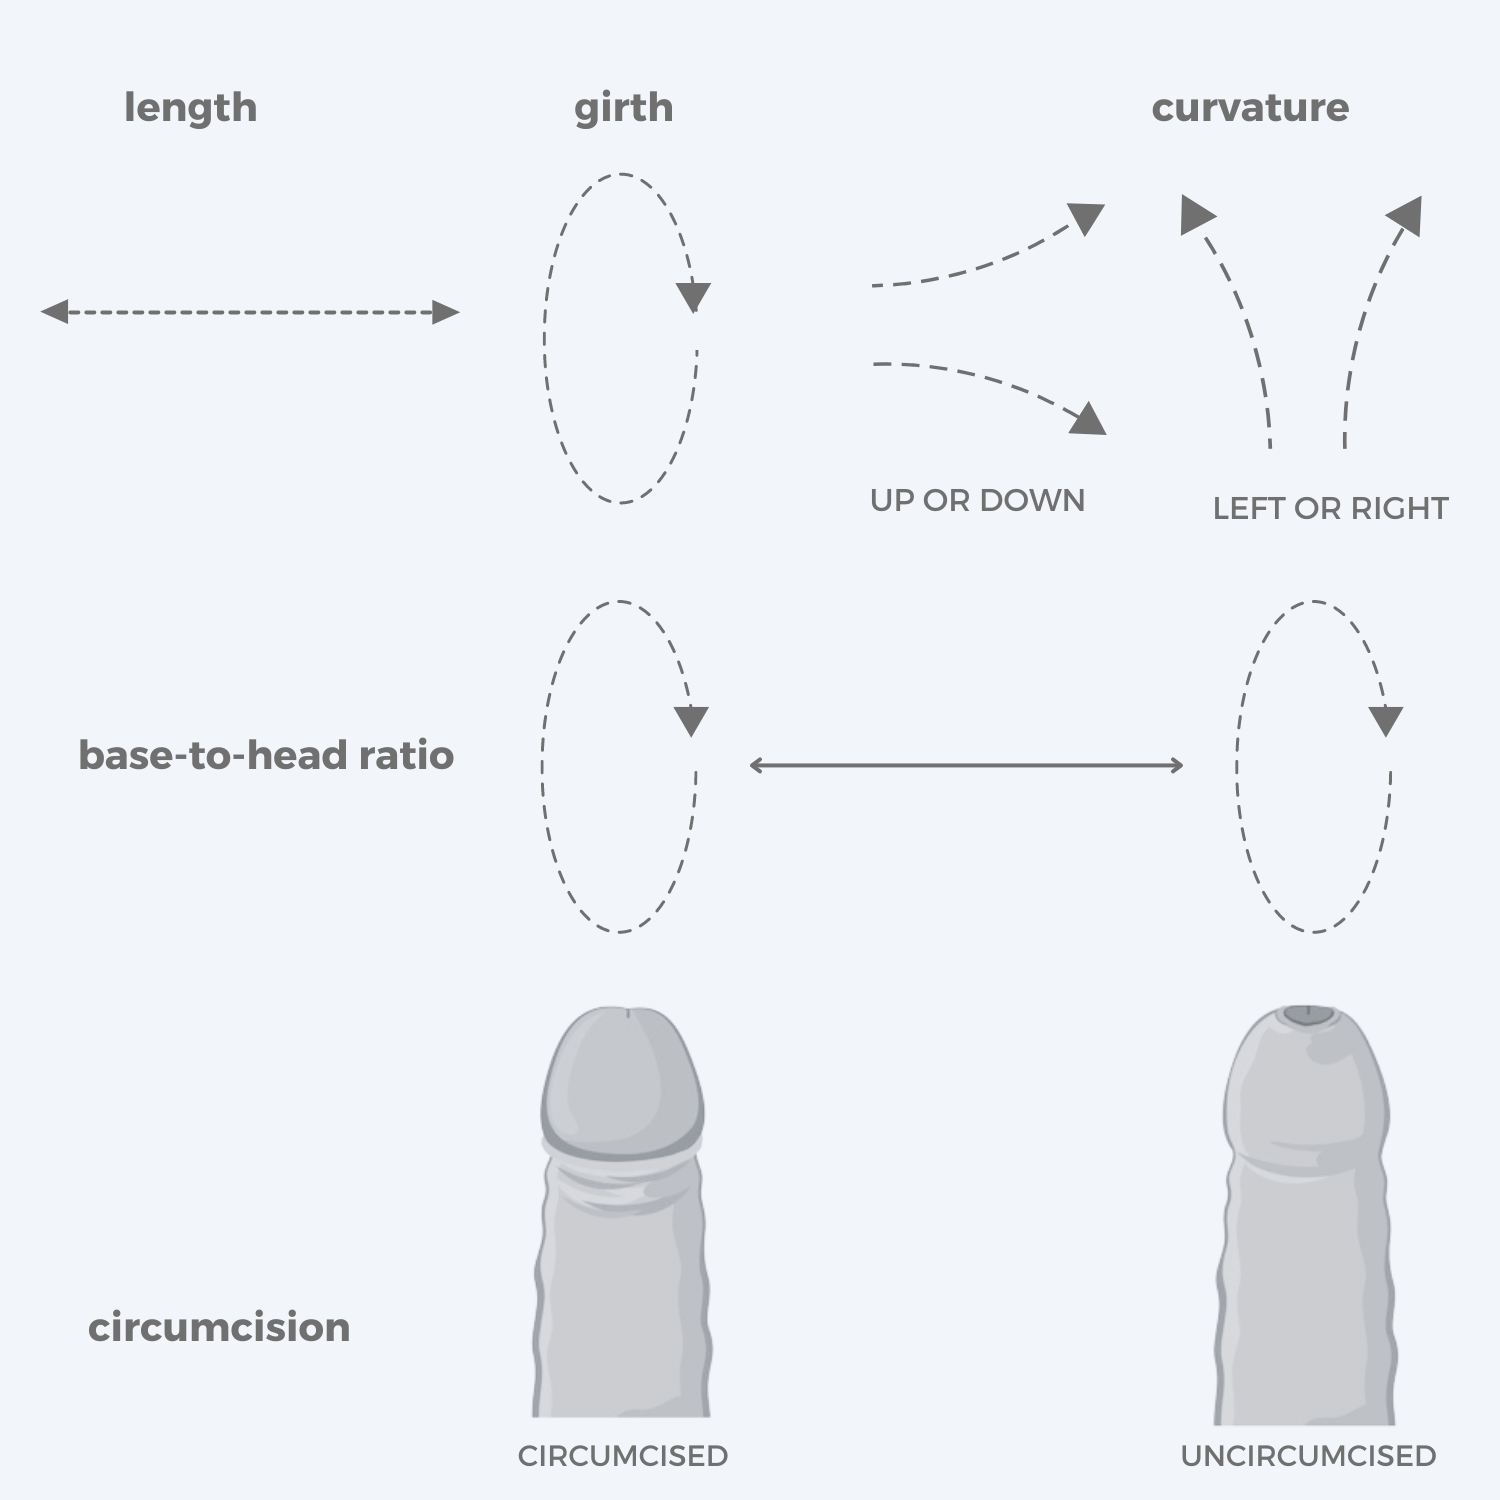 Diagram of the Features of the Penis